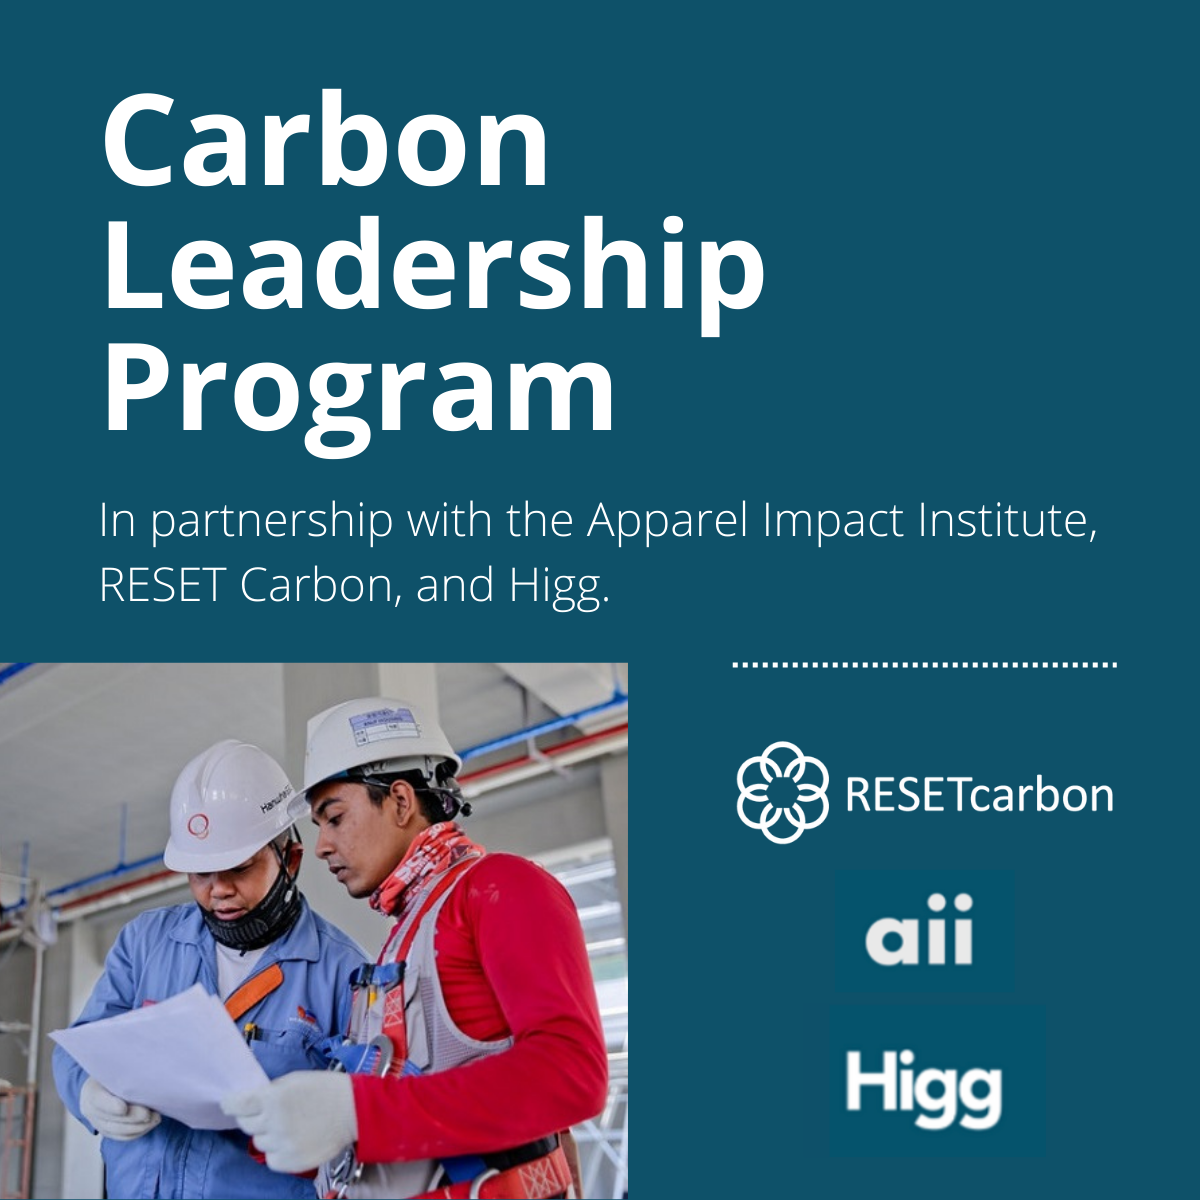 The Carbon Leadership Program: advancing sustainability in the apparel industry